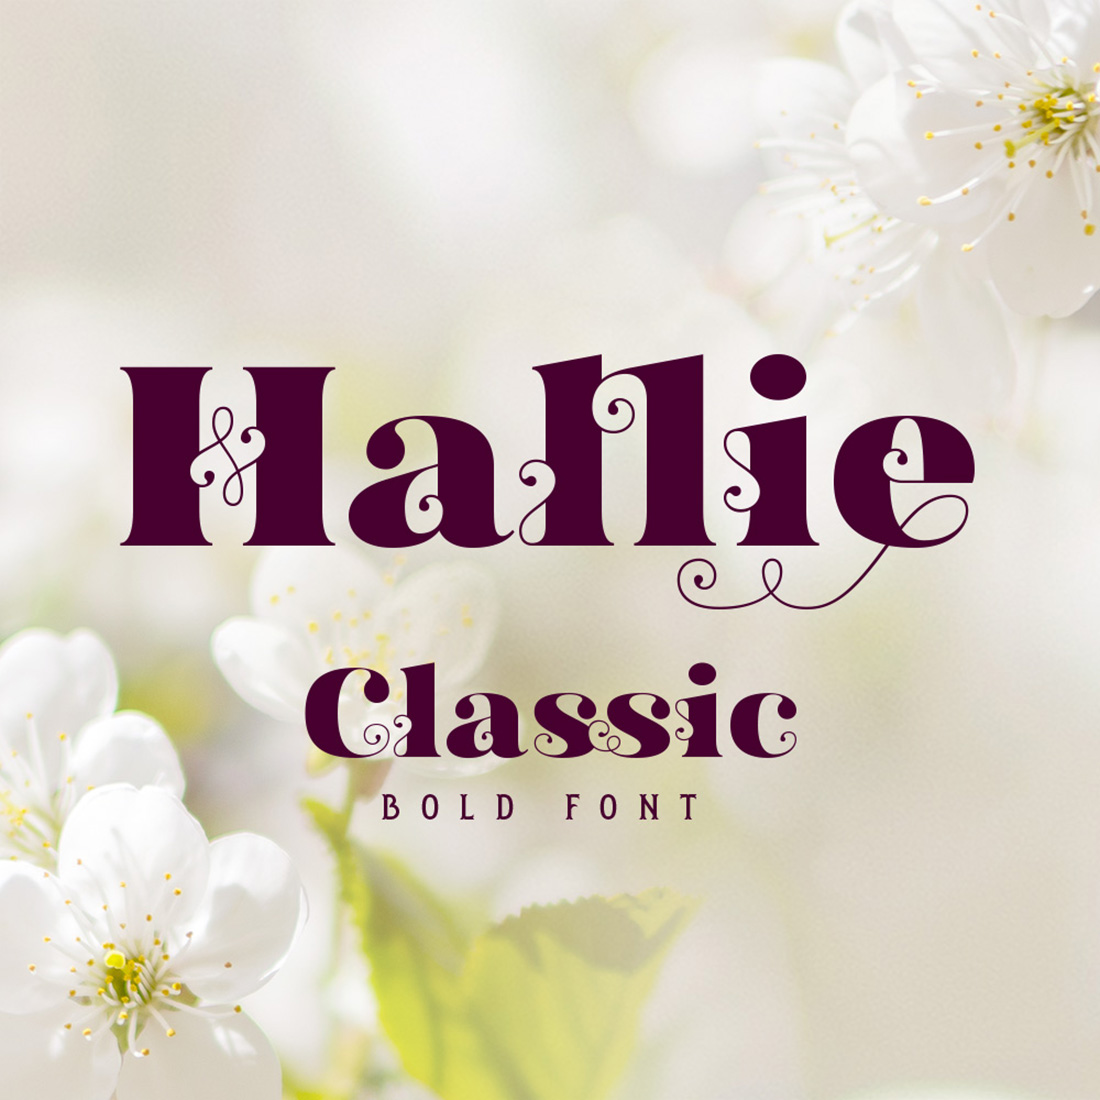 Hallie - Bold Classic Font cover image.